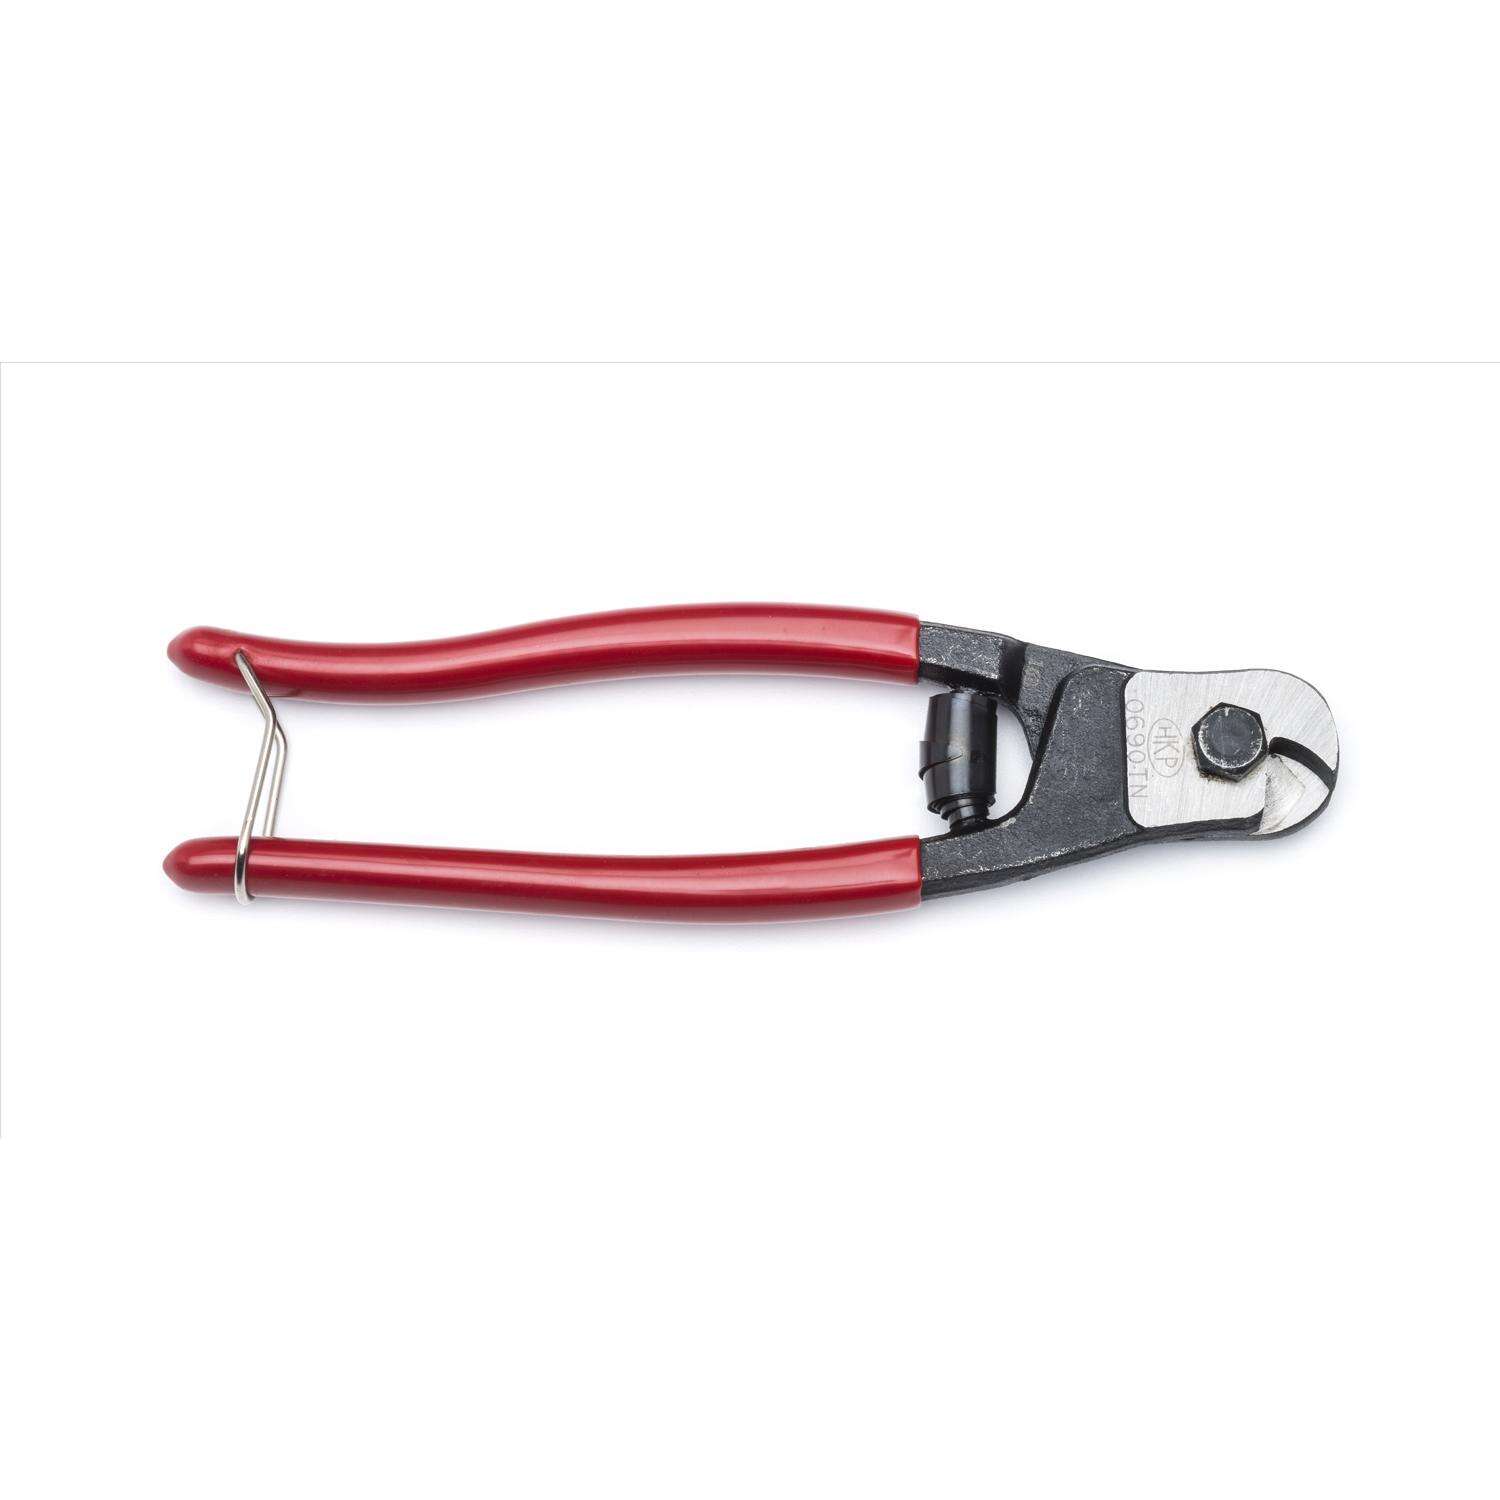 HK Porter Wire Rope and Cable Cutter 0690TN for sale online 